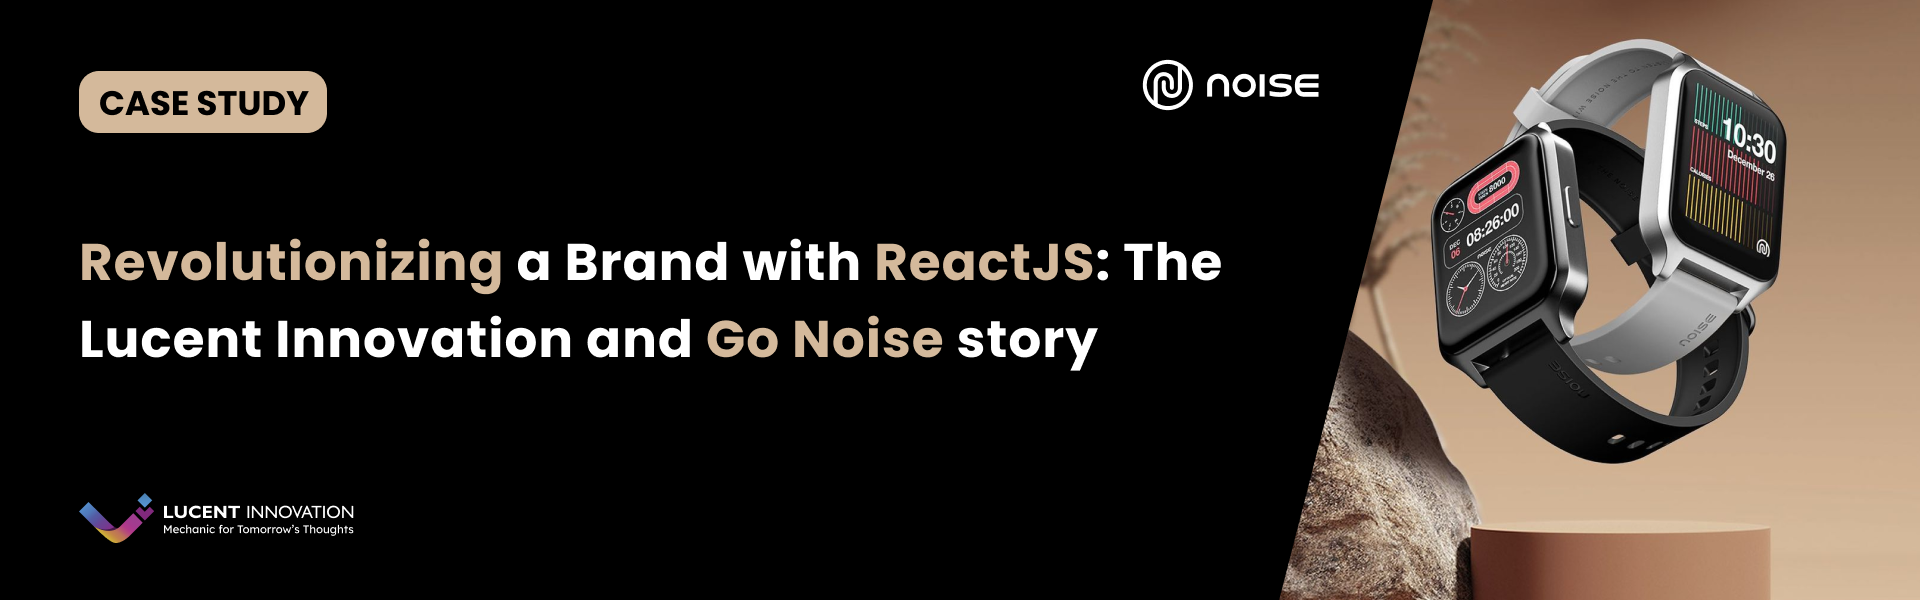 Revolutionizing a Brand With ReactJS: Go Noise and Lucent Innovation Story